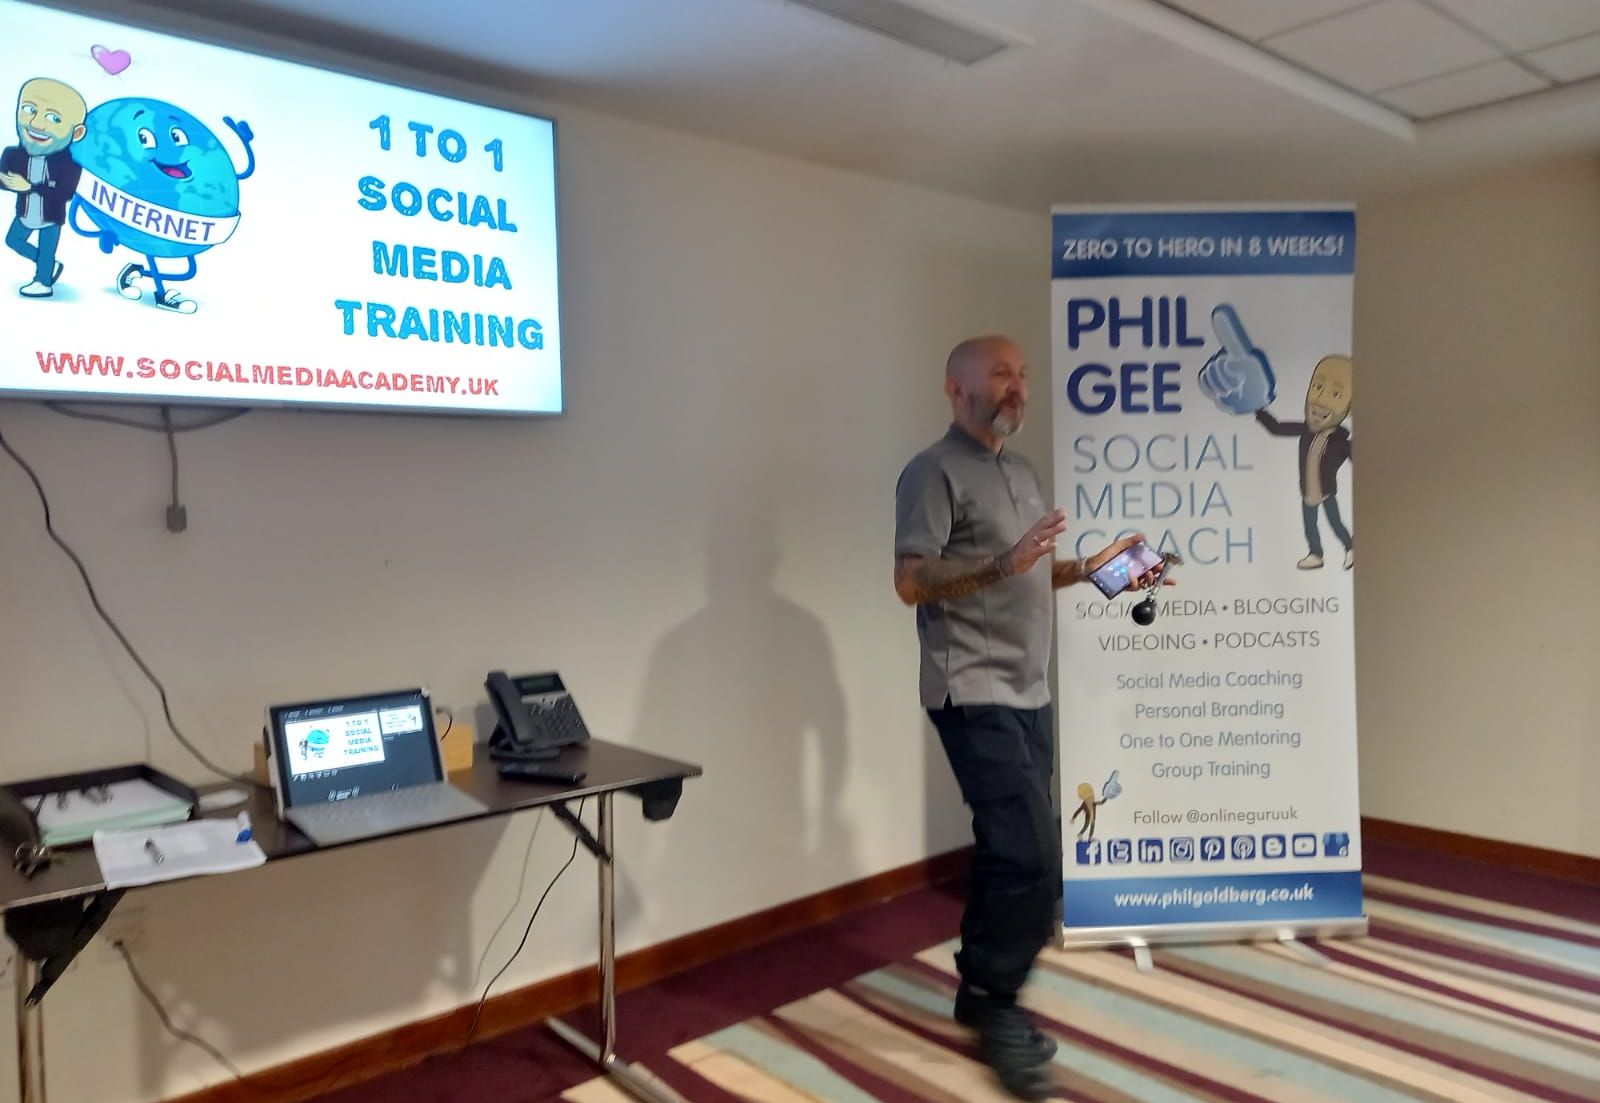 Networking with Gee's Connecting Businesses. Owner Phil Gee